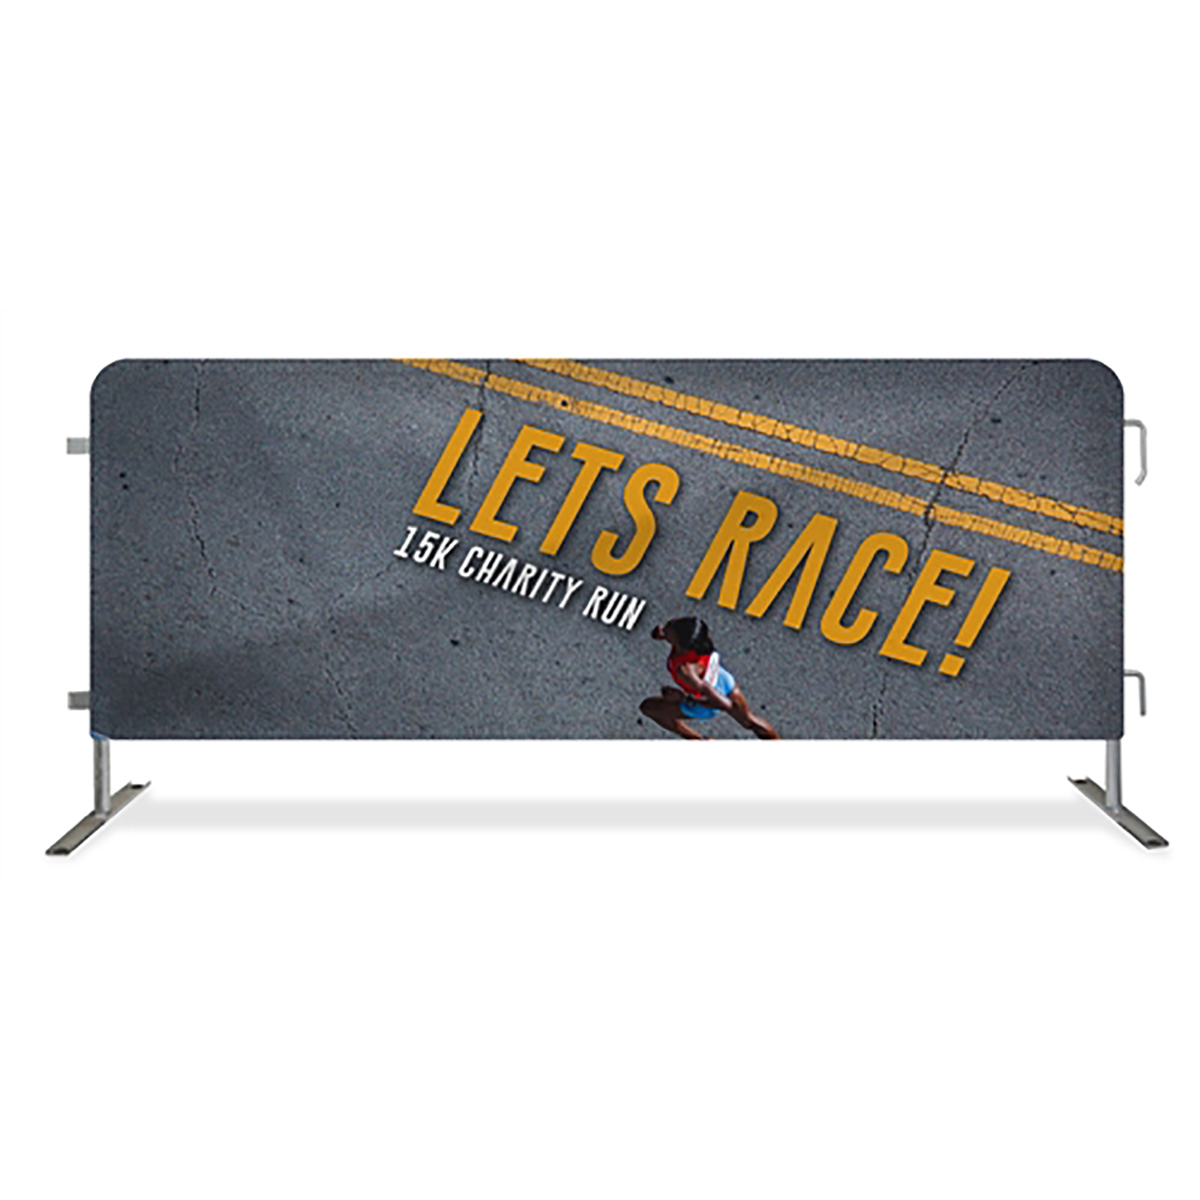 Double Sided Premium Barrier Cover - Large